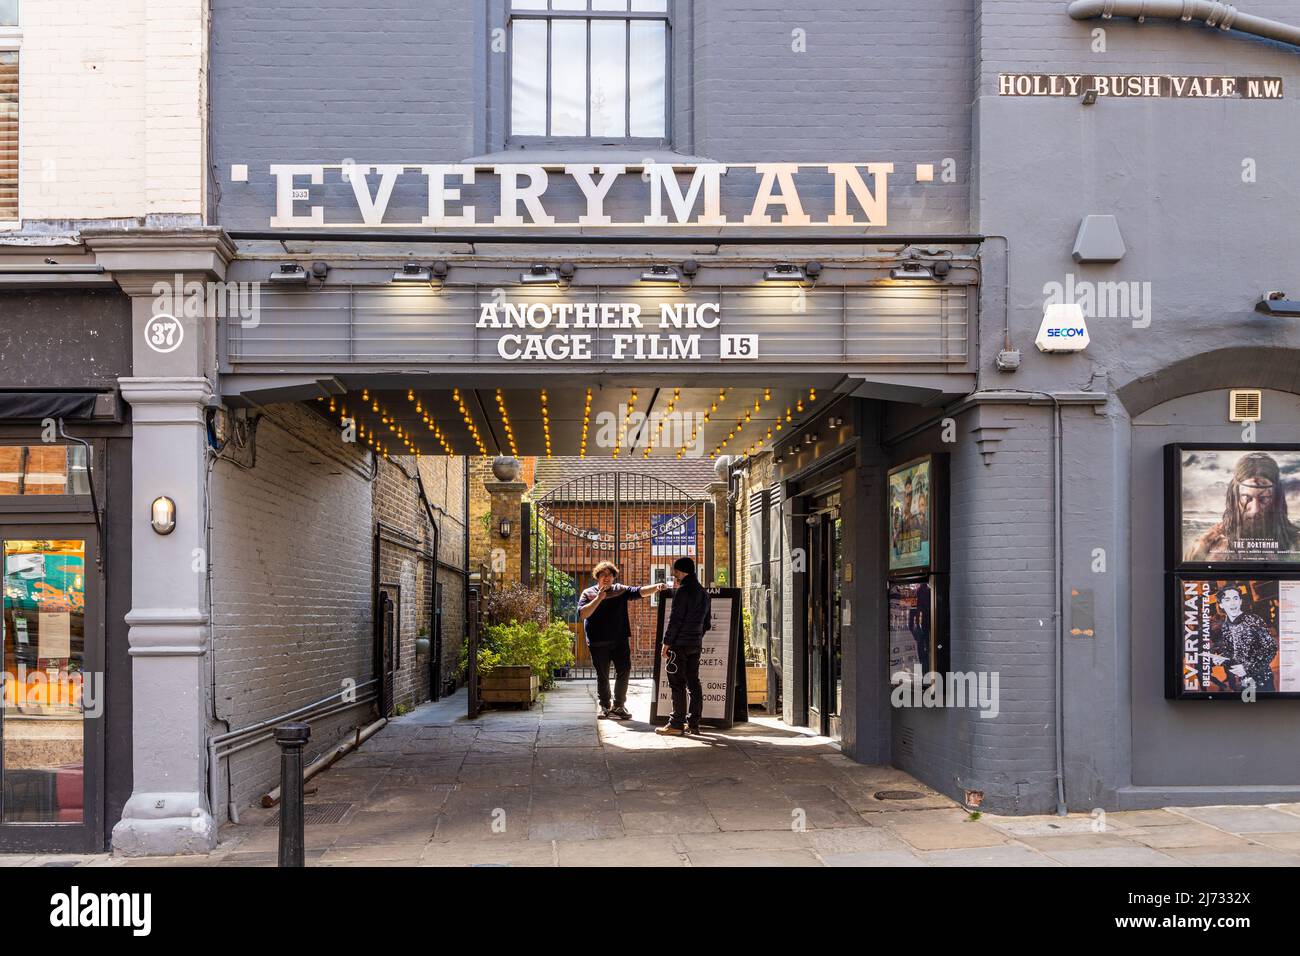 Everyman cinema Hampstead London NW3. High quality offering food and drink can be ordered and brought to your seat while you relax and watch the movie Stock Photo